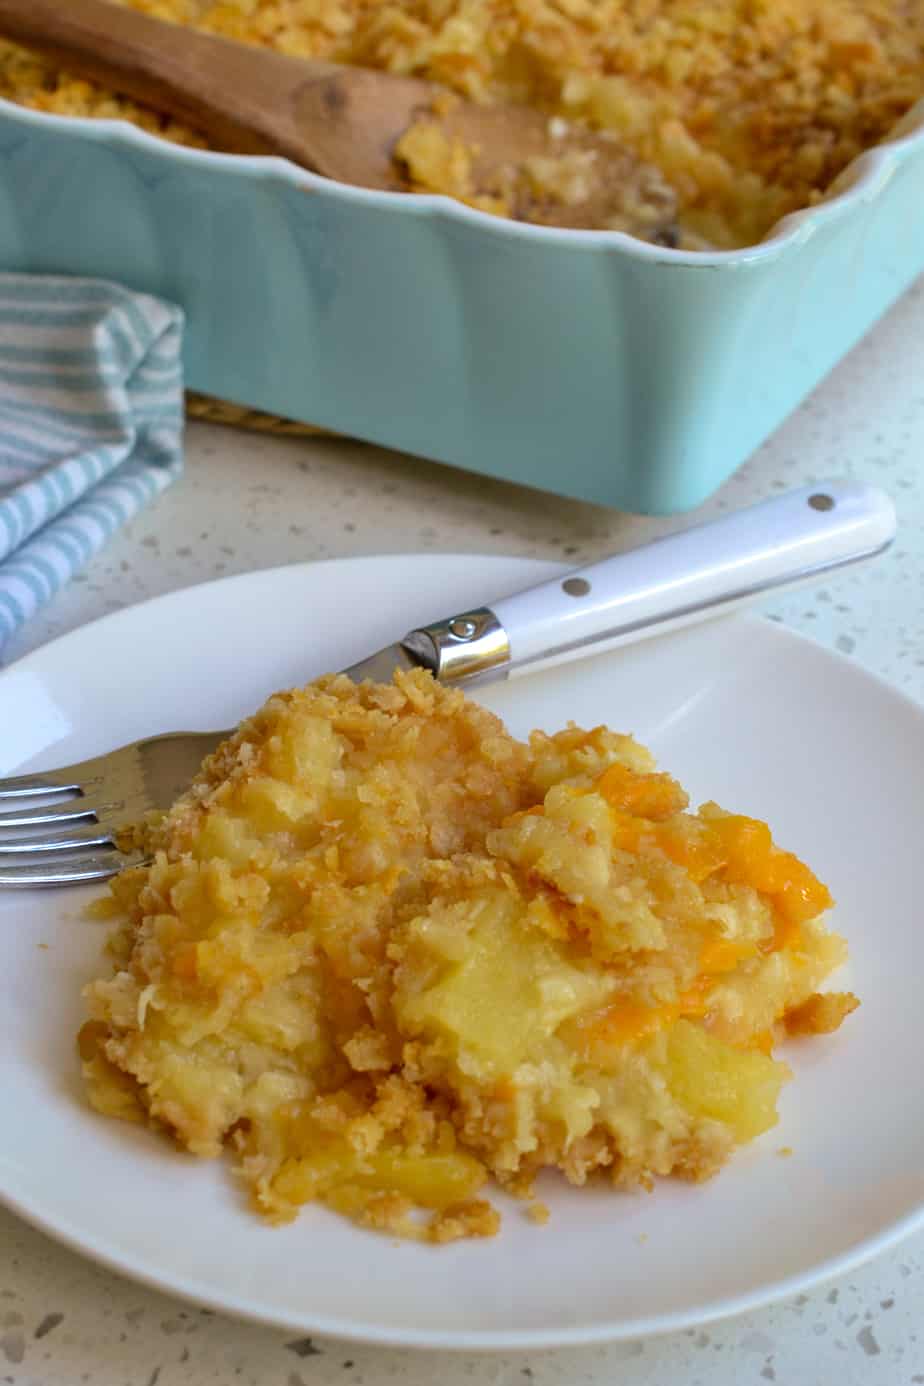 Cheesy pineapple casserole on a plate